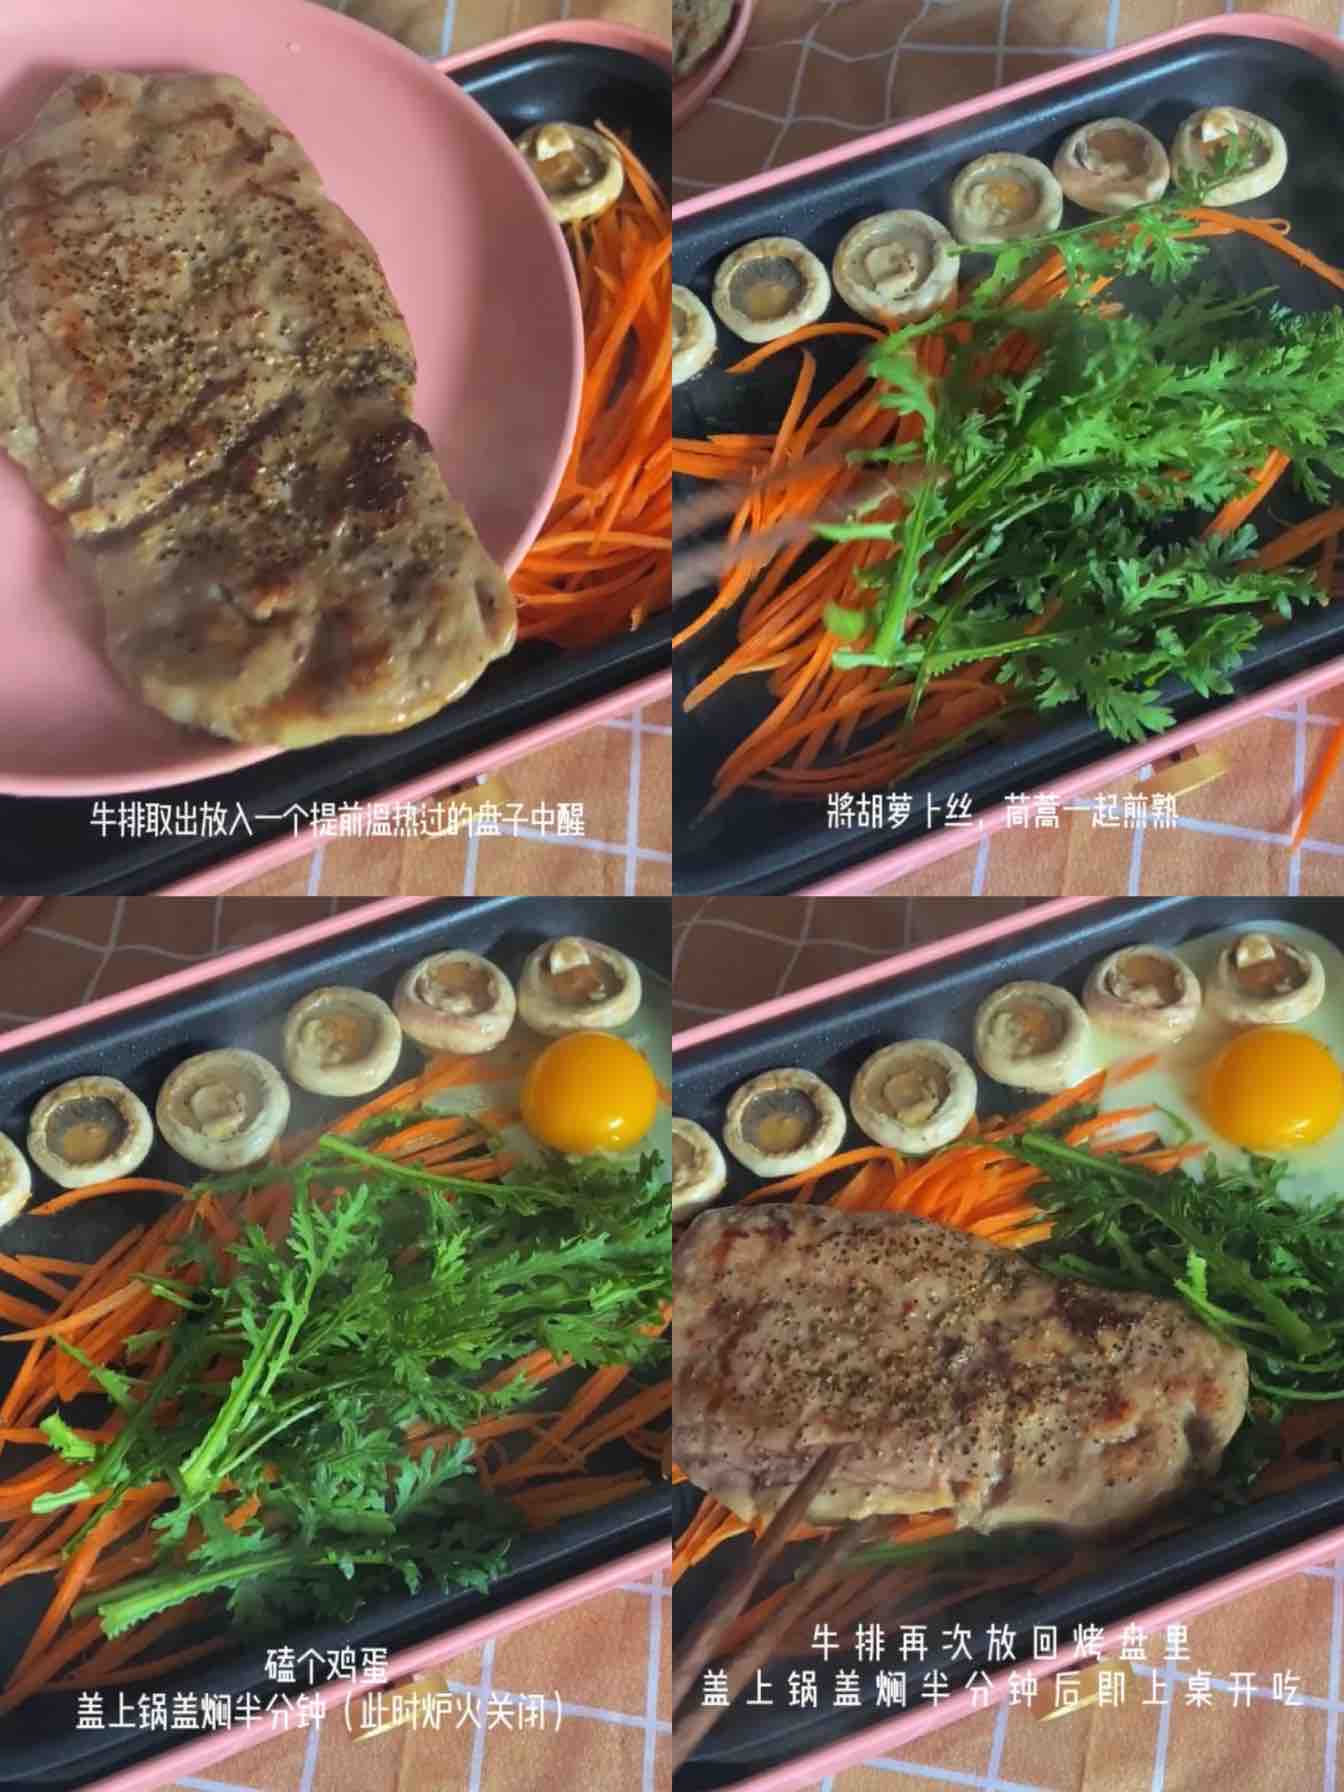 Homestay Can Also Have A Big Meal~~holiday Steak recipe